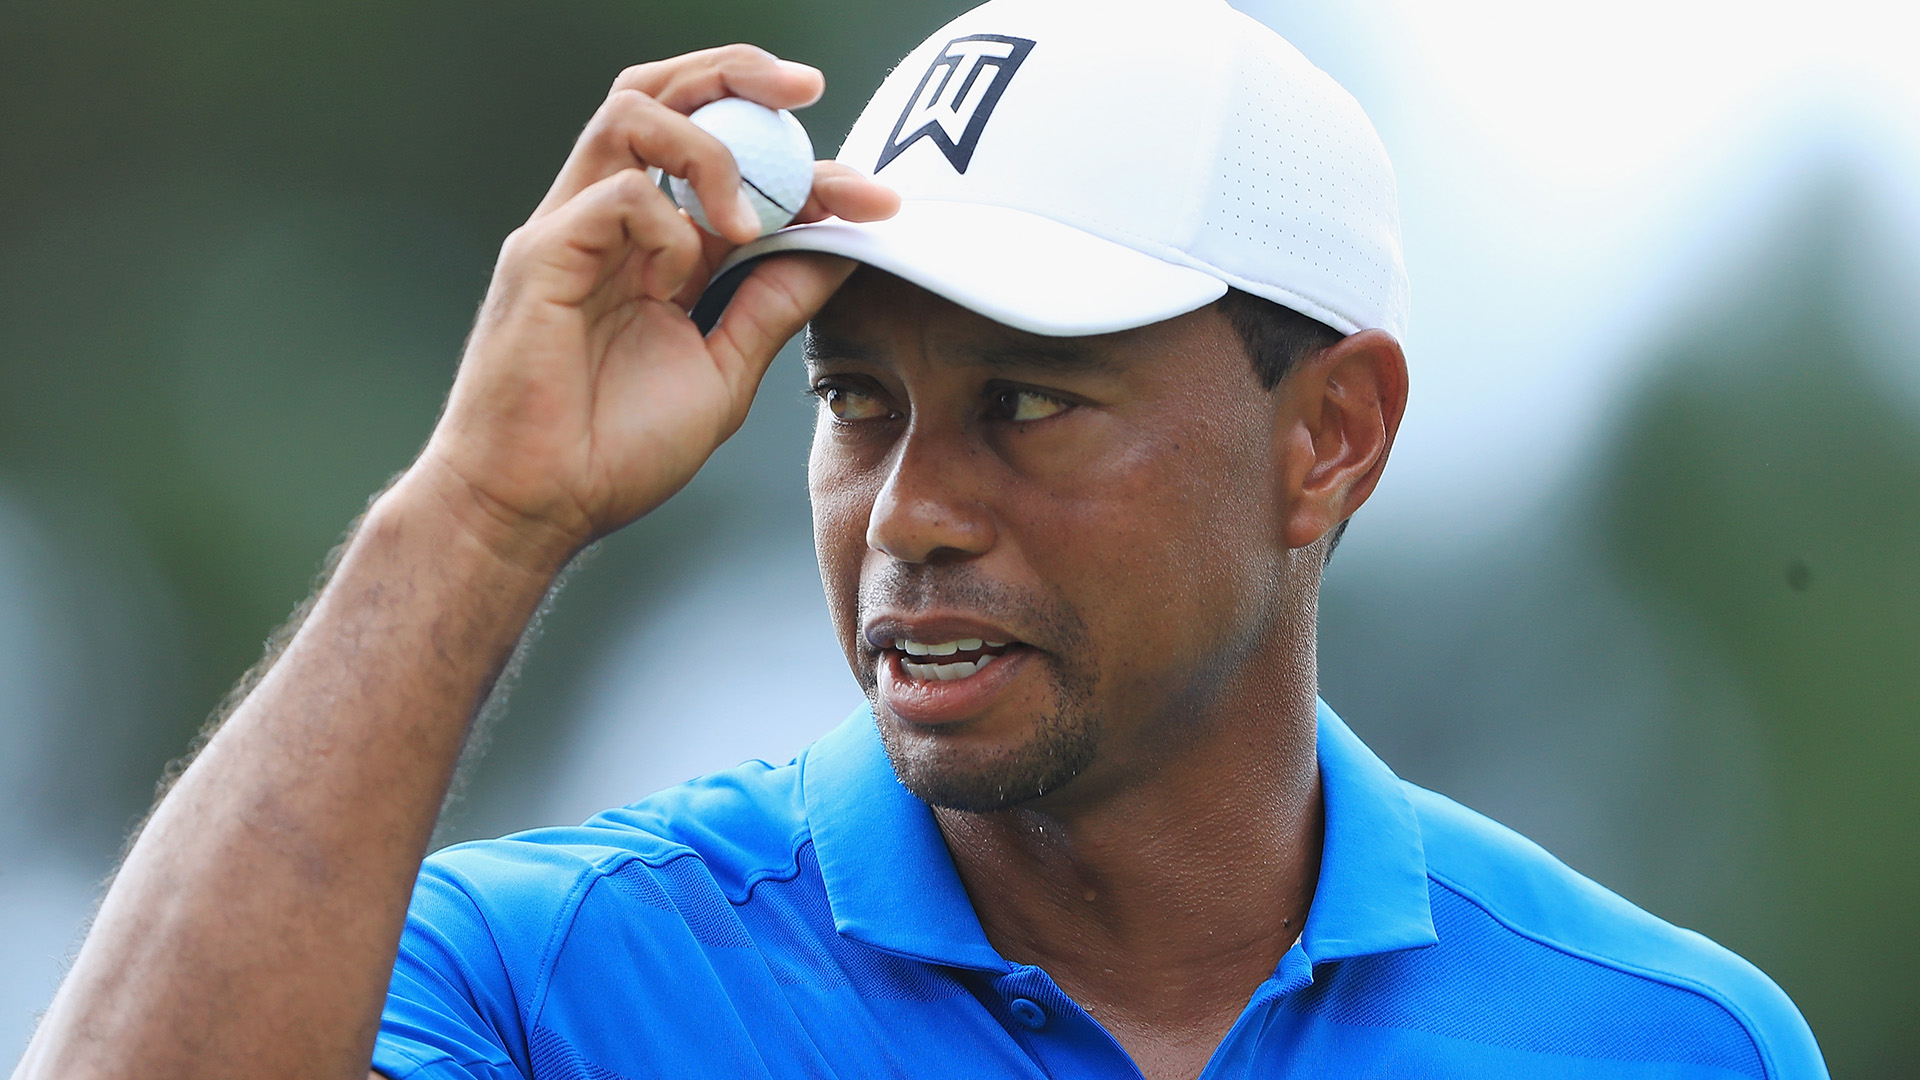 Tiger Woods leads by three after 54 holes at the Tour Championship